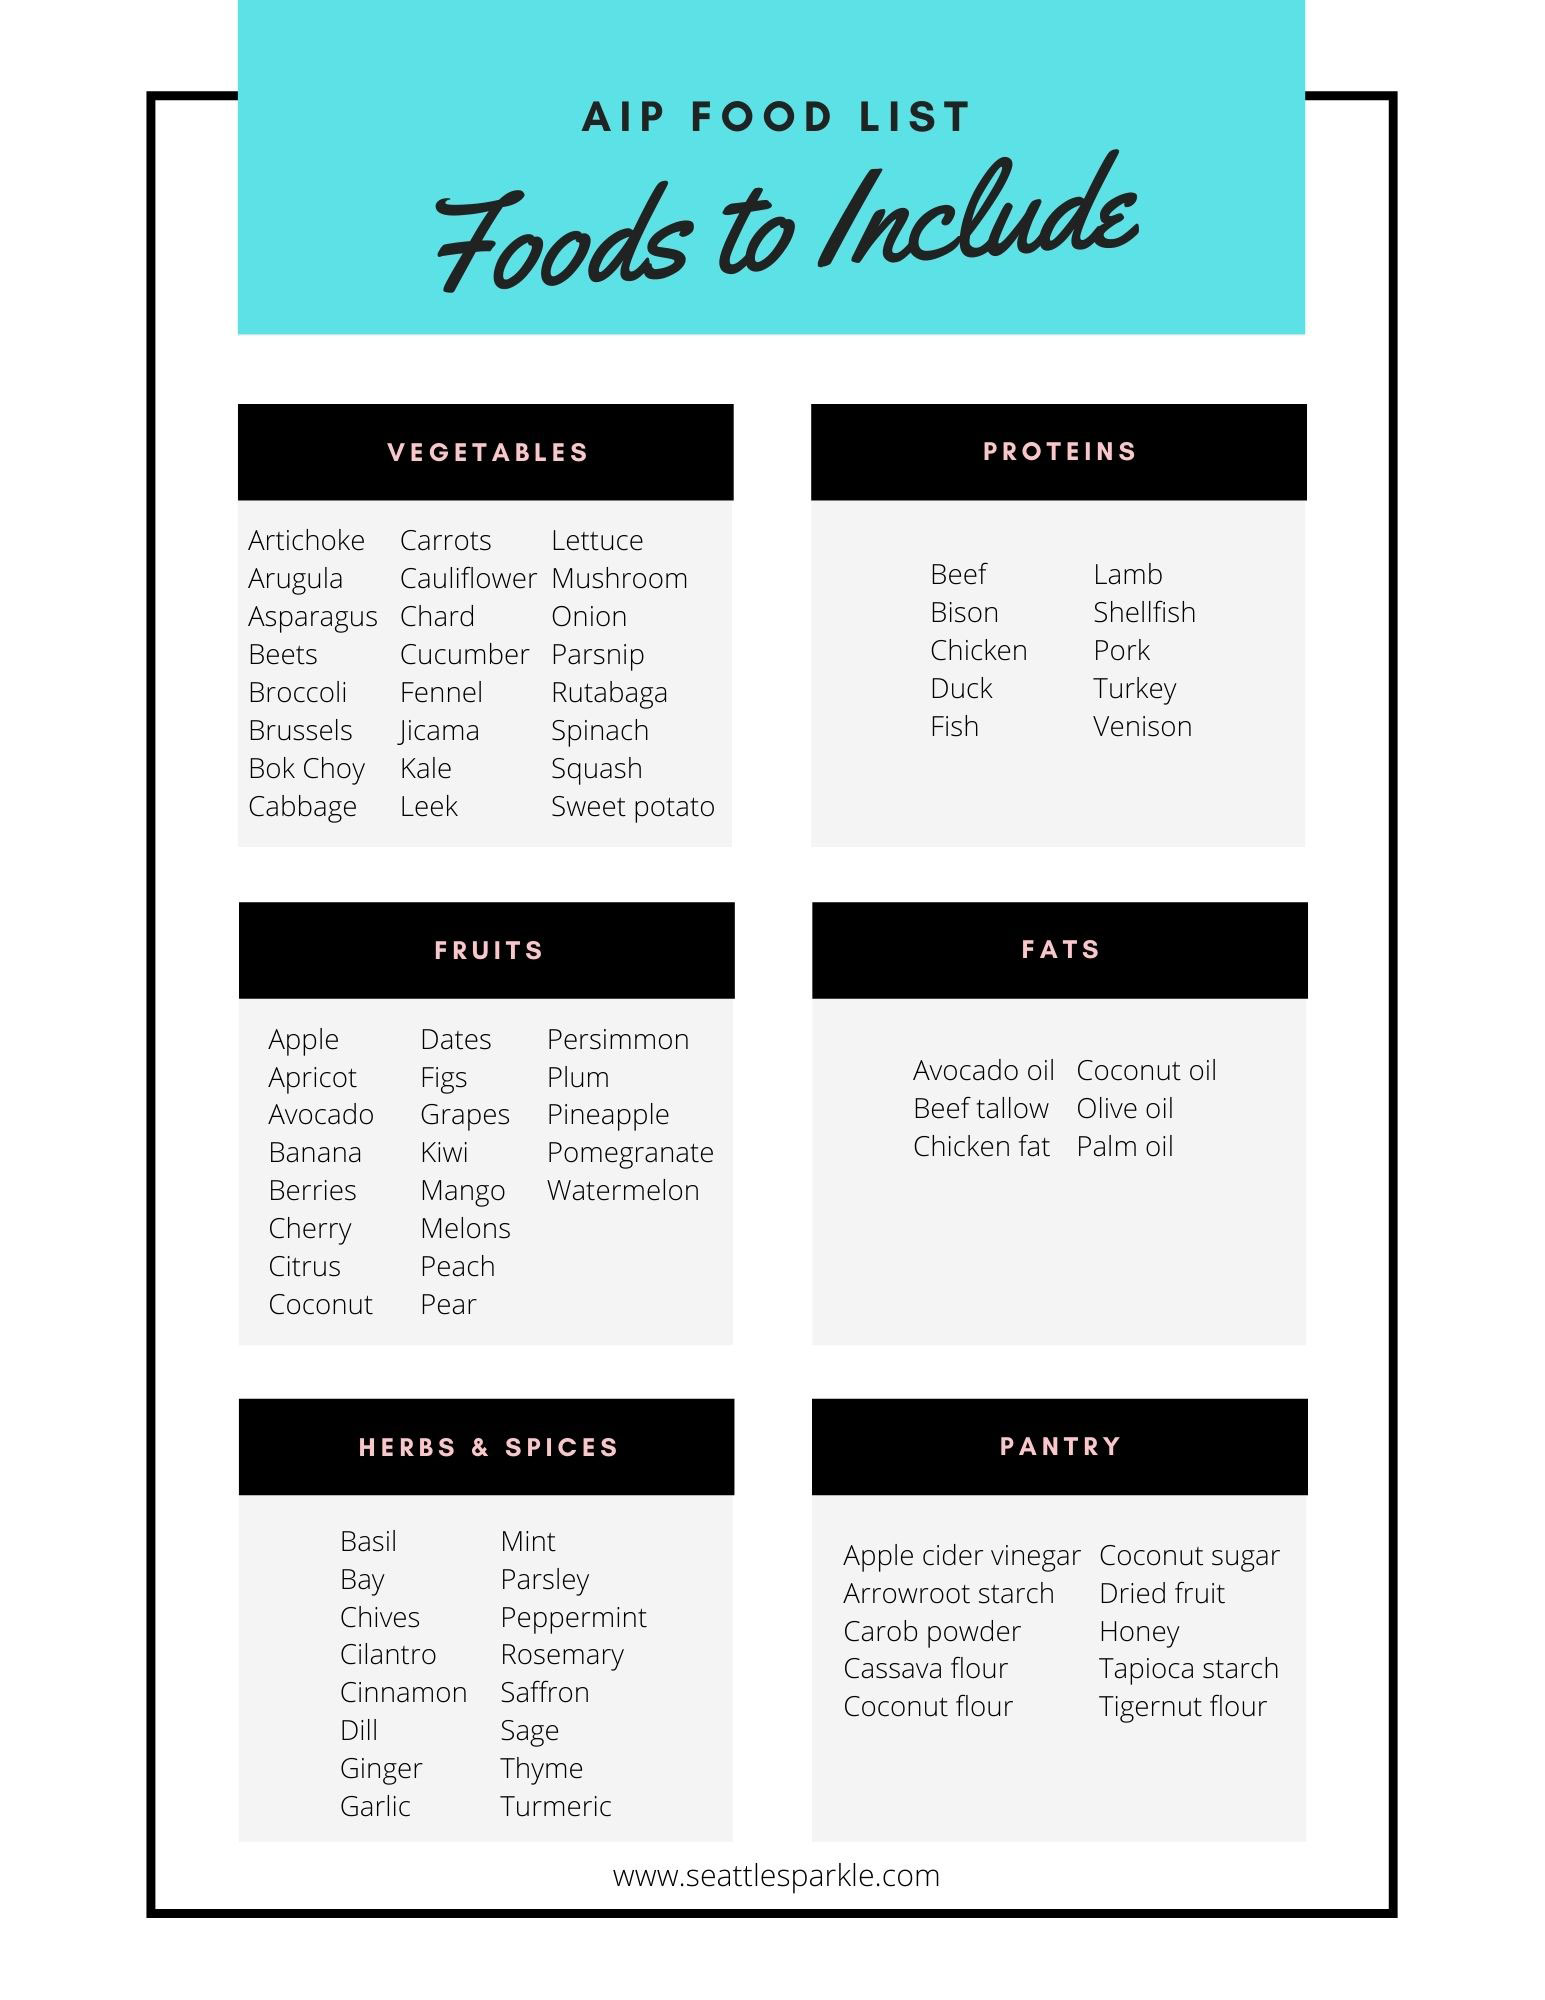 Foods-to-Include